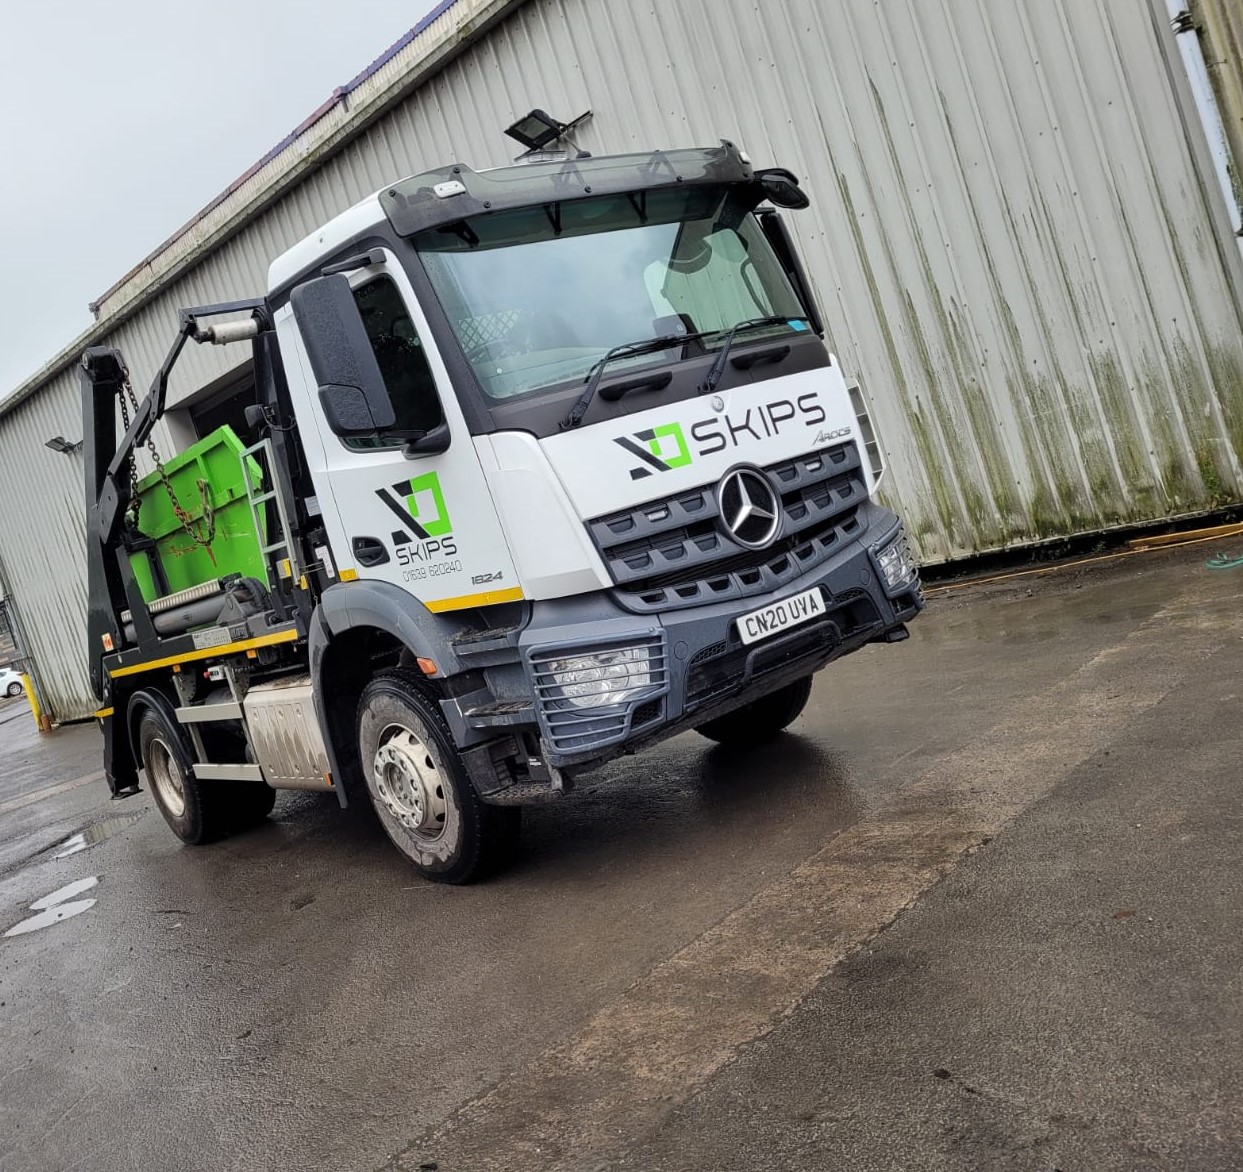 New skip hire division added to our expanding business